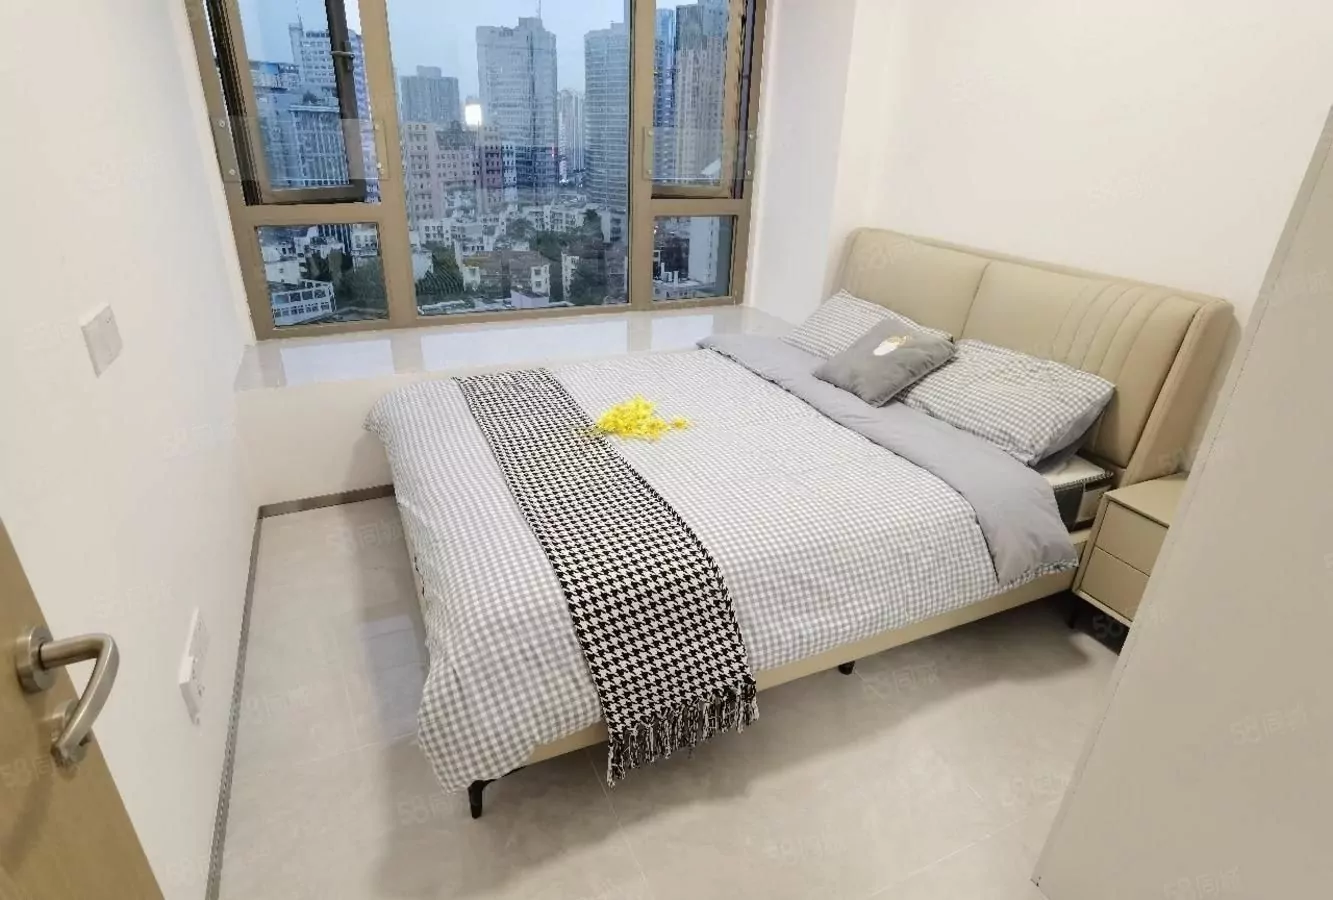 Featured image for “Nice one bedroom nice style in Baoan”